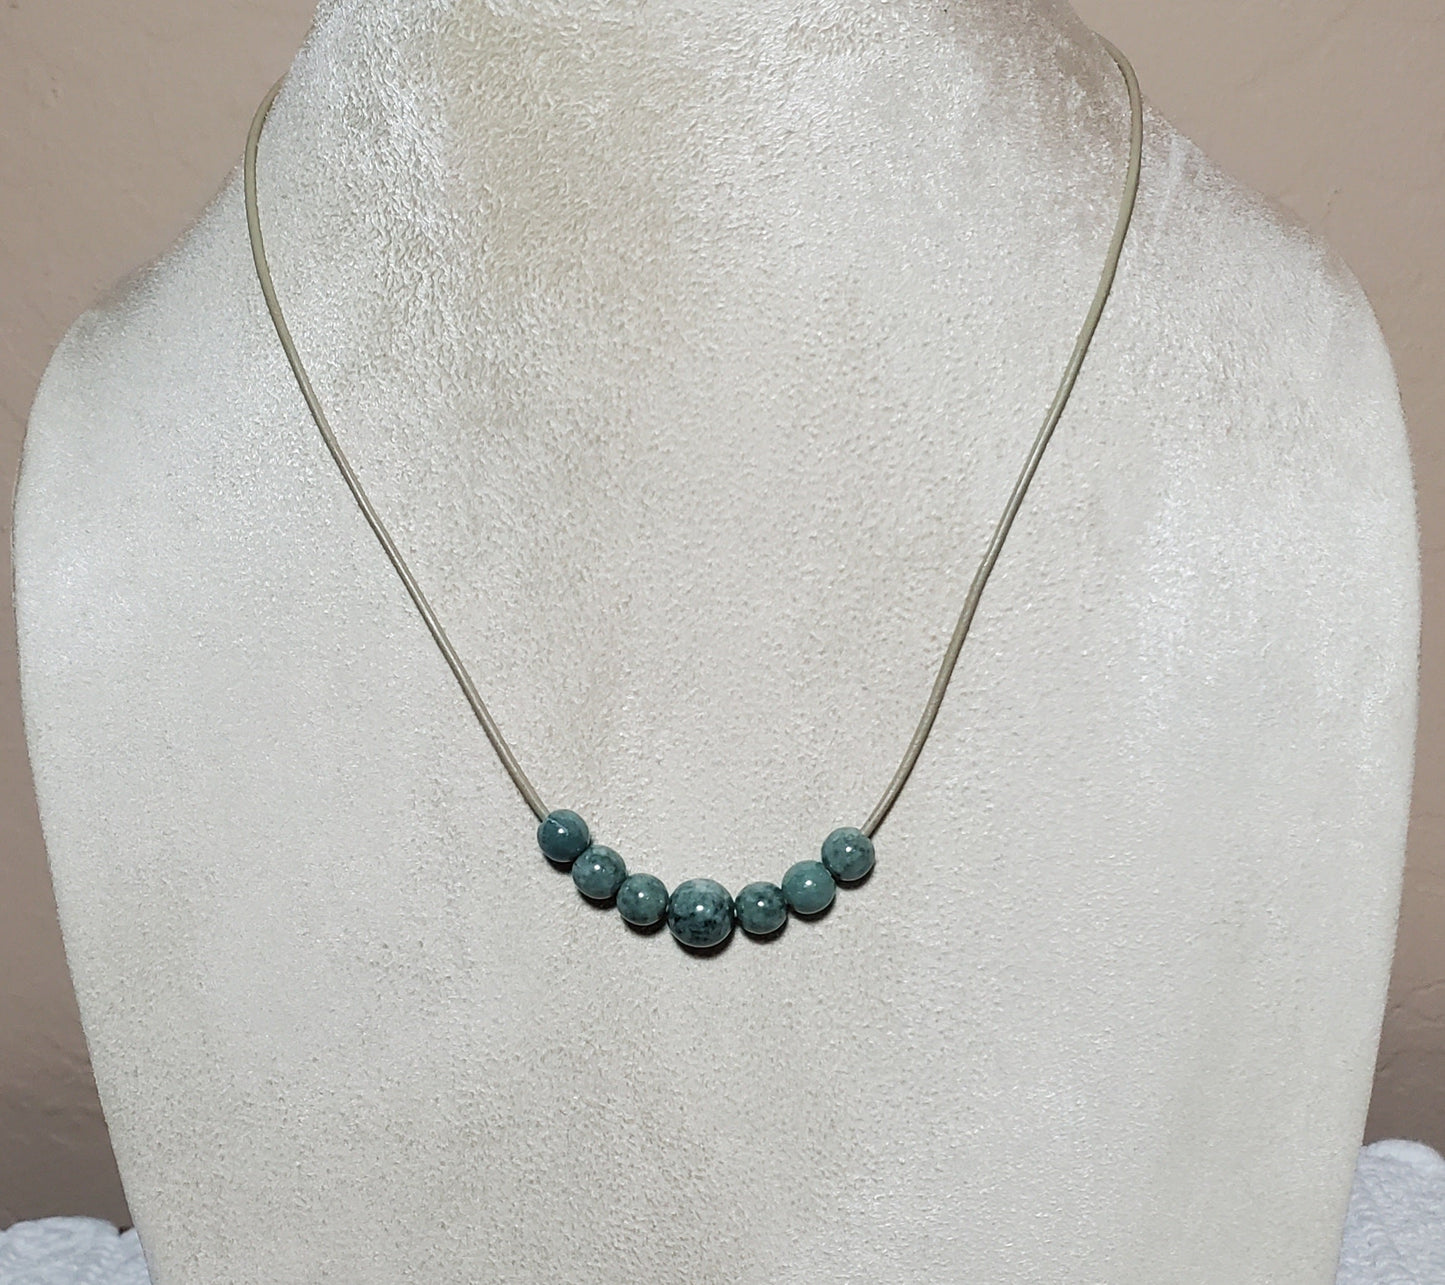 Casual Jade Gem Stone & Leather Cord Necklace designs | Door County Jewelry by Wendy Carpenter